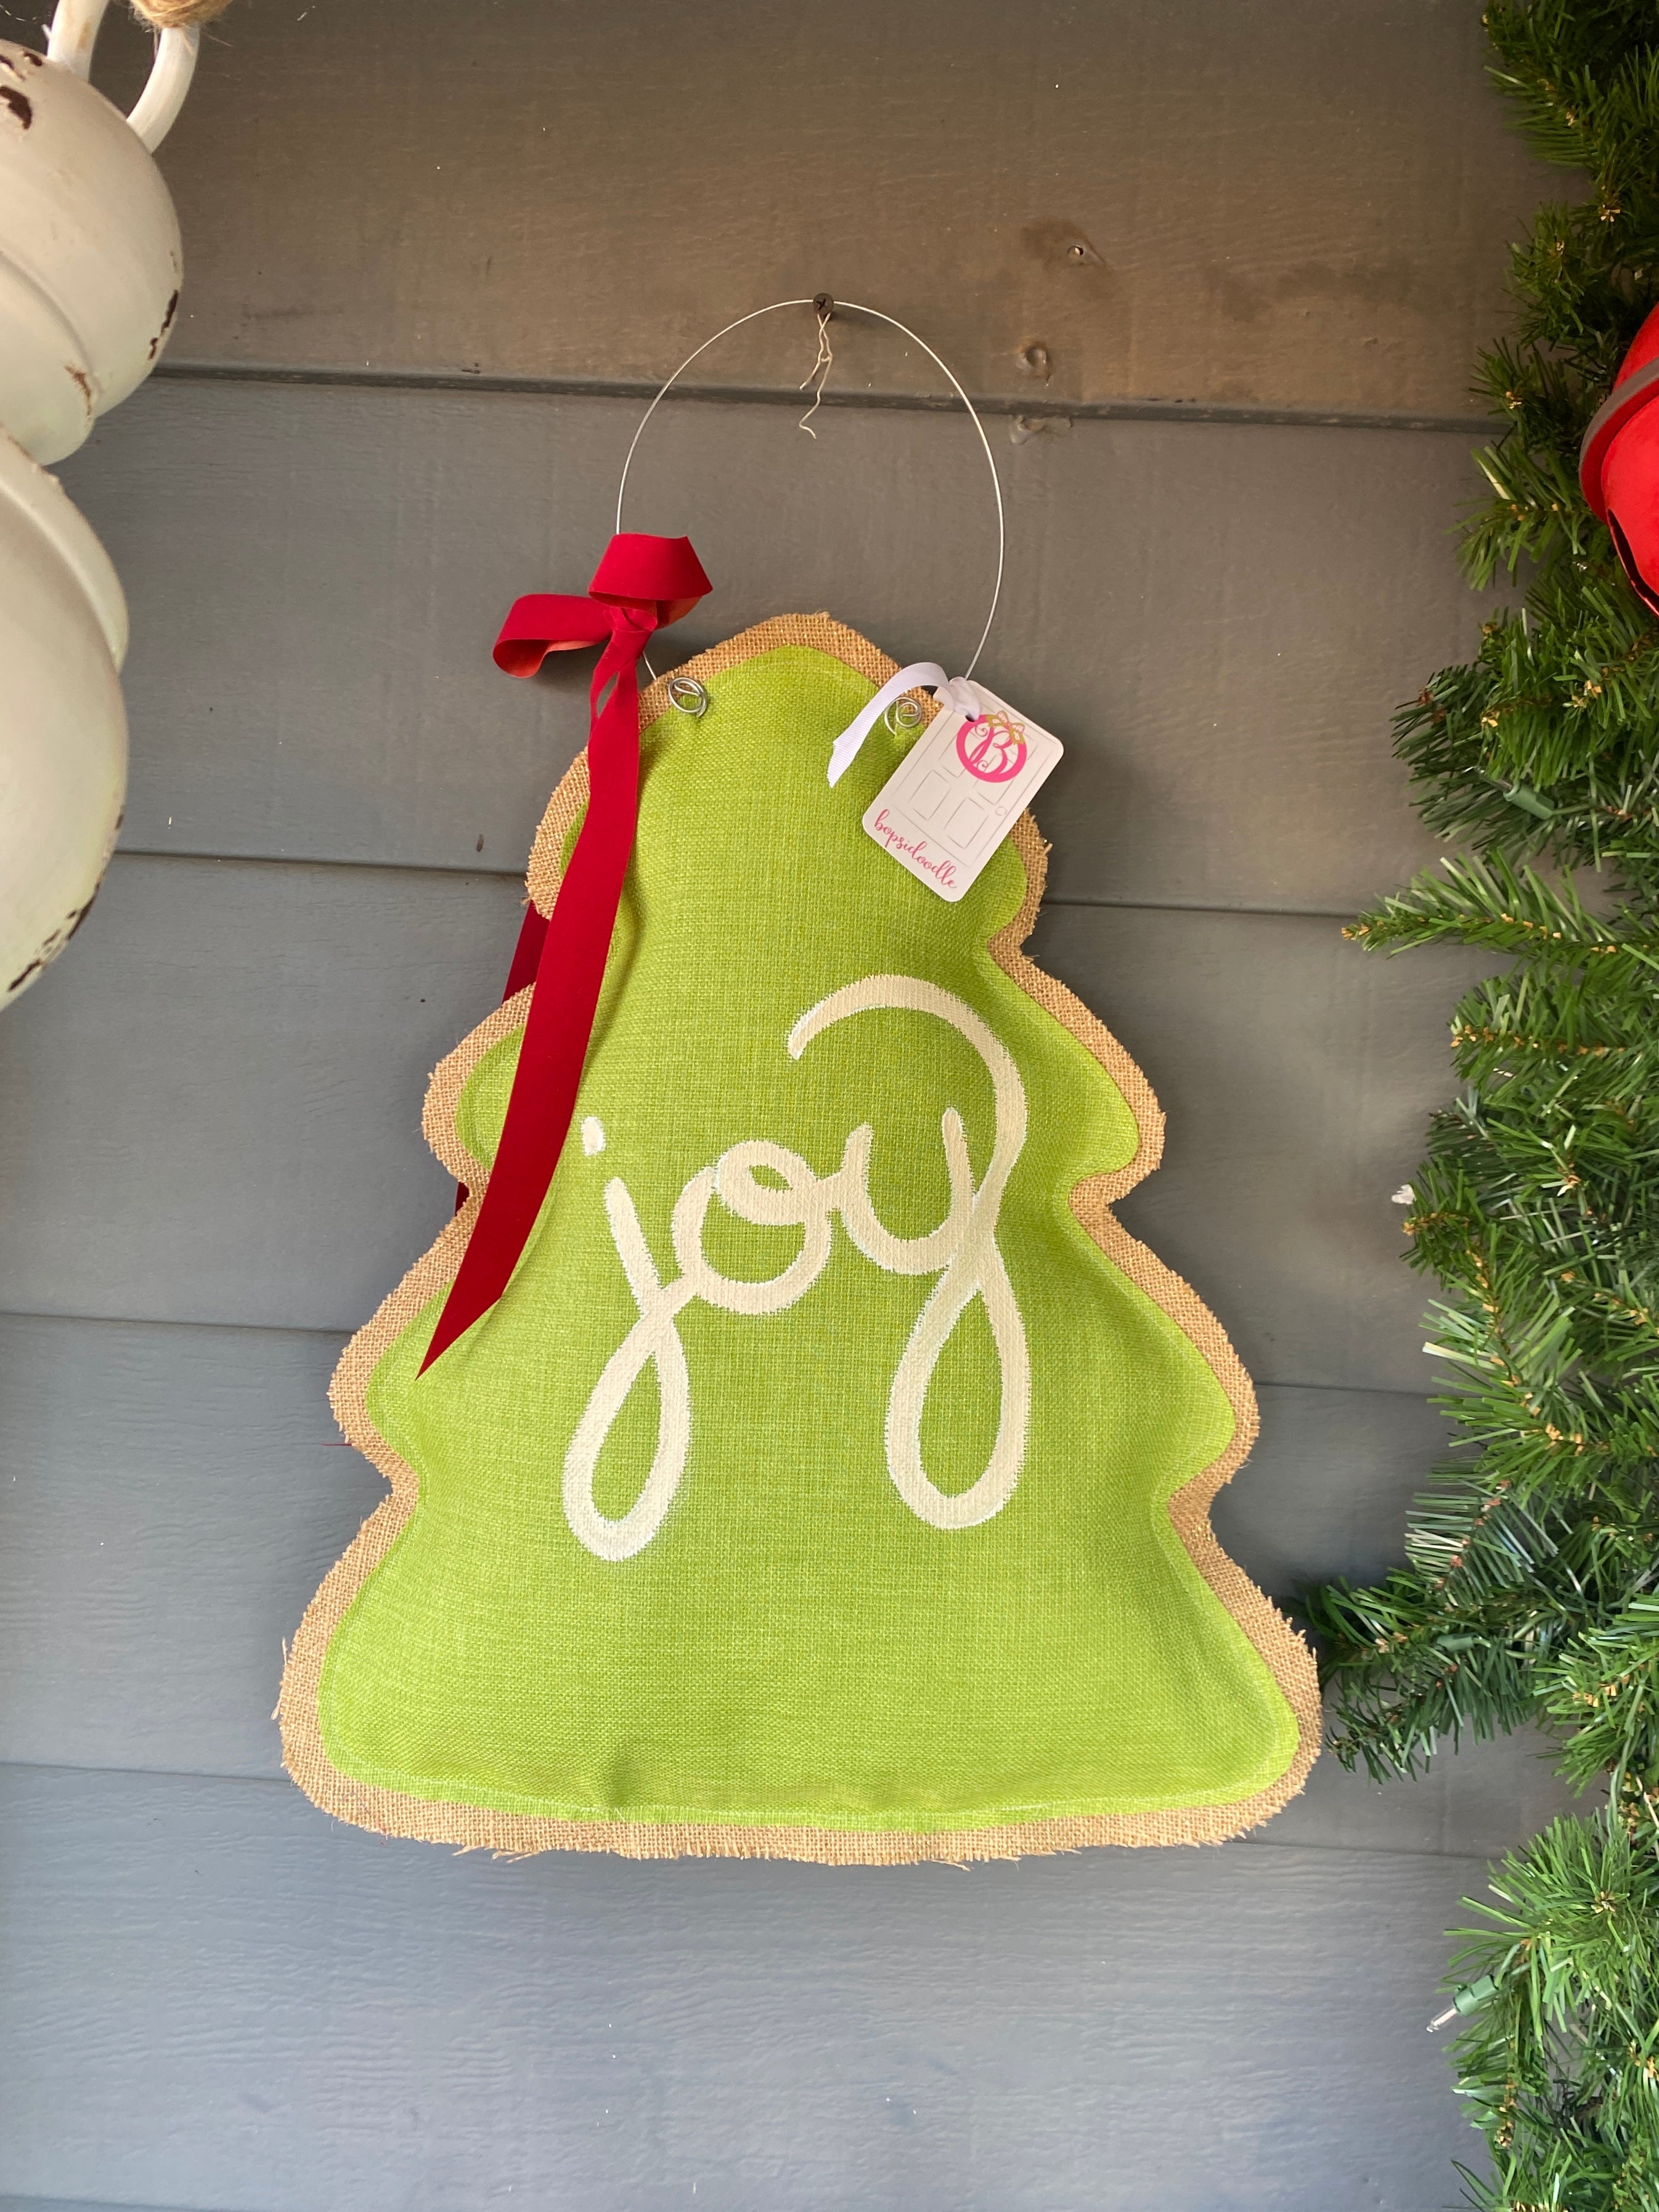 What a fun way to brighten up your front door! This door hanger is green and tree shaped. It's accented with Joy lettering and a red bow. It's adorable!